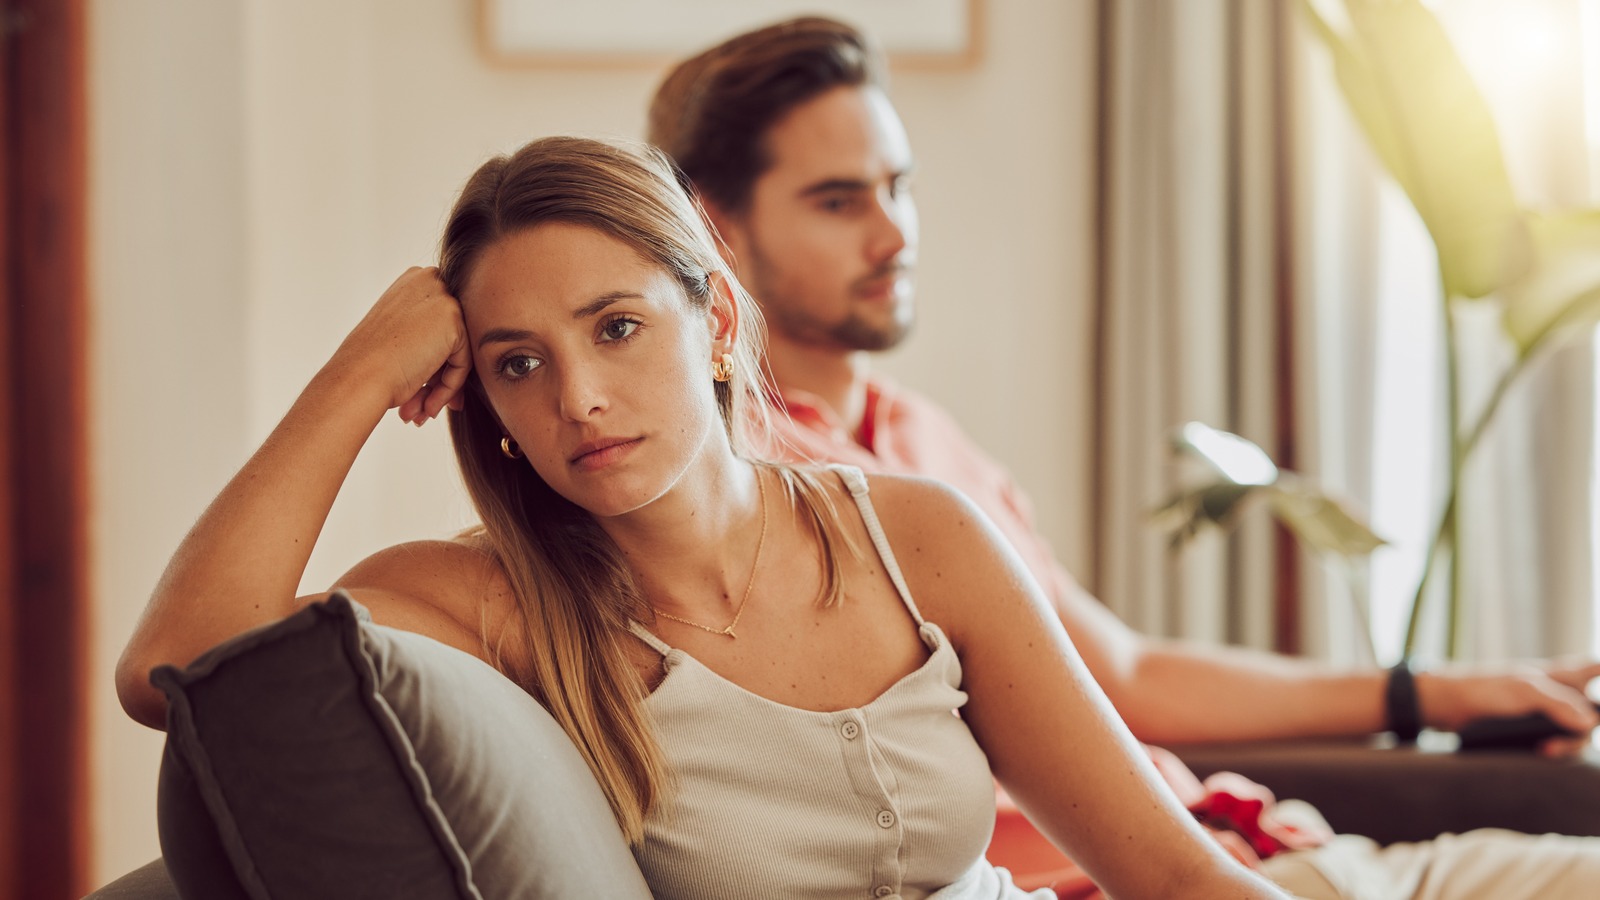 Dating Expert Explains Why You Want To Rebound So Quickly After A Breakup 9304